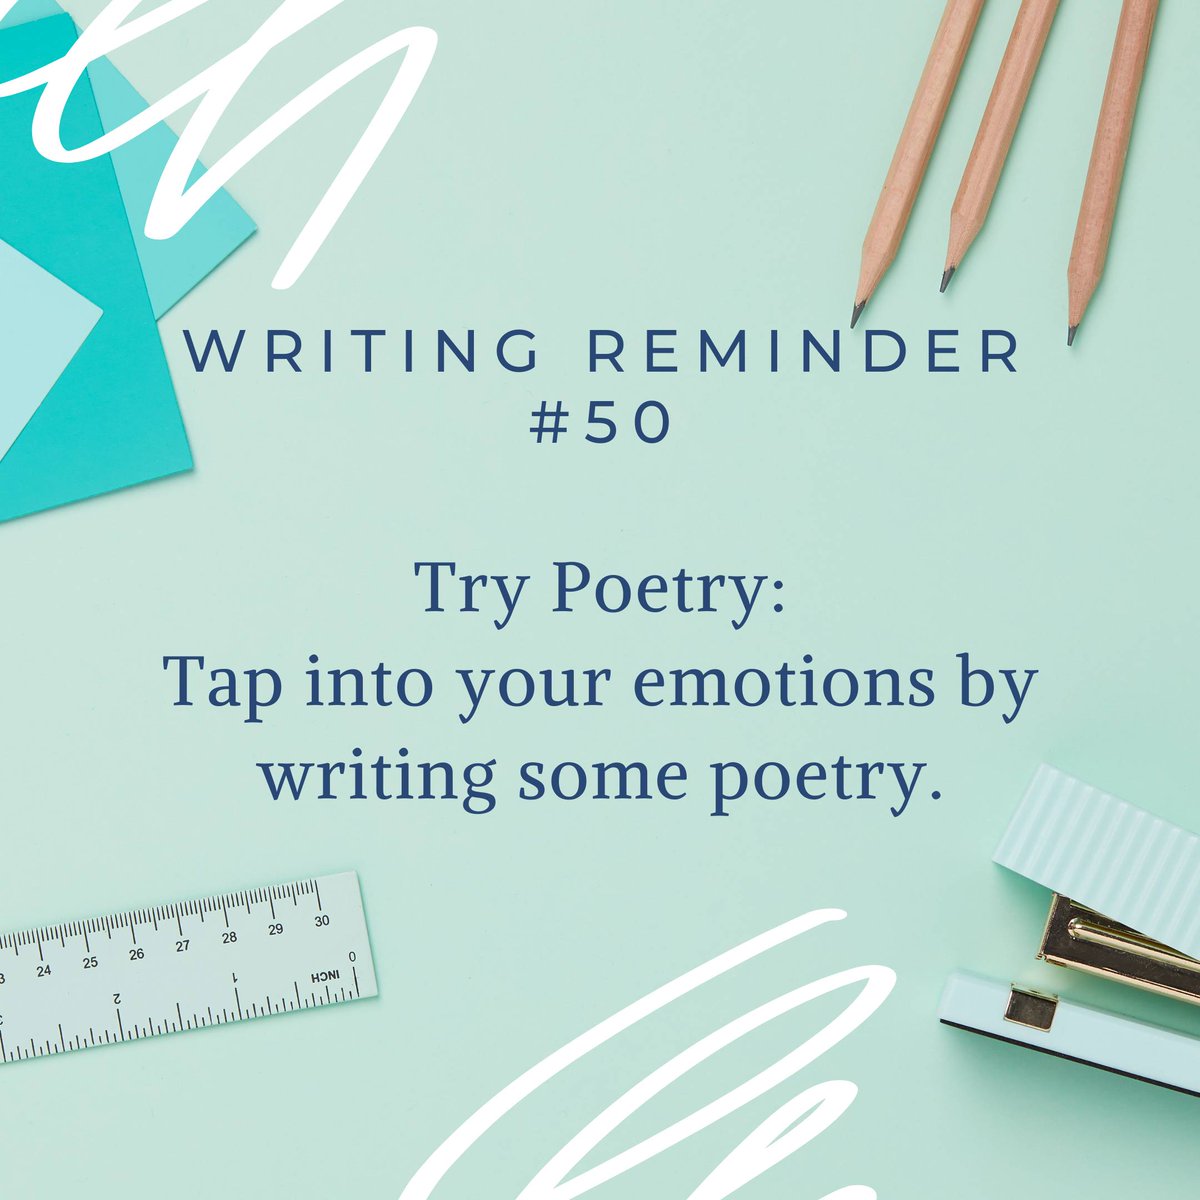 Since I just published a poetry book, it's only fitting that my 50th Writing Reminder is to Try Poetry. 🥰🥰

#writingreminder #writepoetry #trypoetry #writepoems #poem #poems #poemsofinstagram #poetryofig #poetryofig #poetryaustralia #poetryauthor #poetrylover #emotionalpoetry